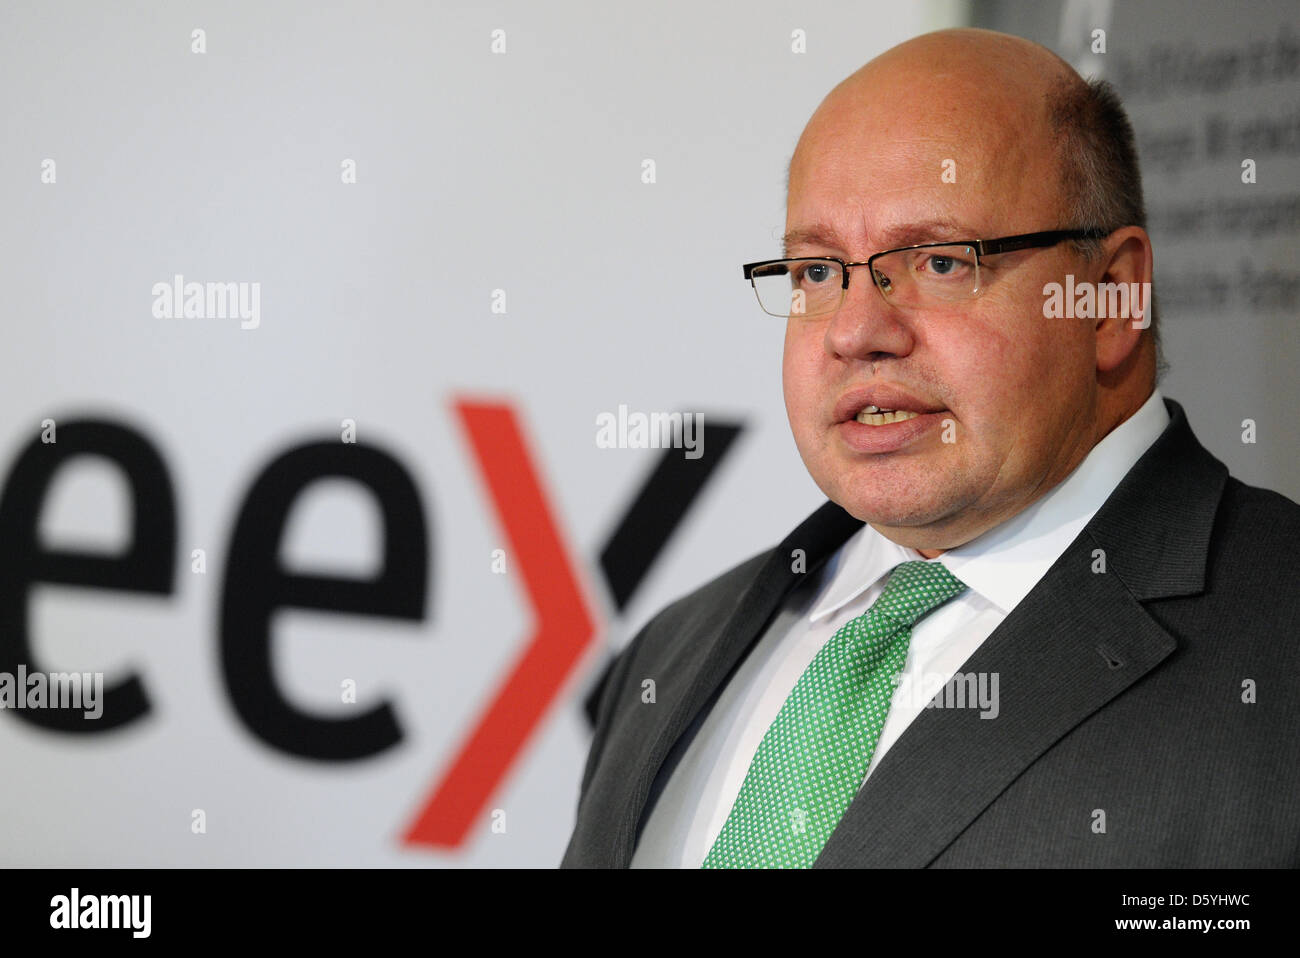 German Environment Minister Peter Altmaier talks in front of the European Energy Exchange (EEX) logo in Leipzig, Germany, 26 October 2012. Altmaier is calling on countries to put aside the north-south conflict for the energy turnaround. Photo: Hendrik Schmidt Stock Photo